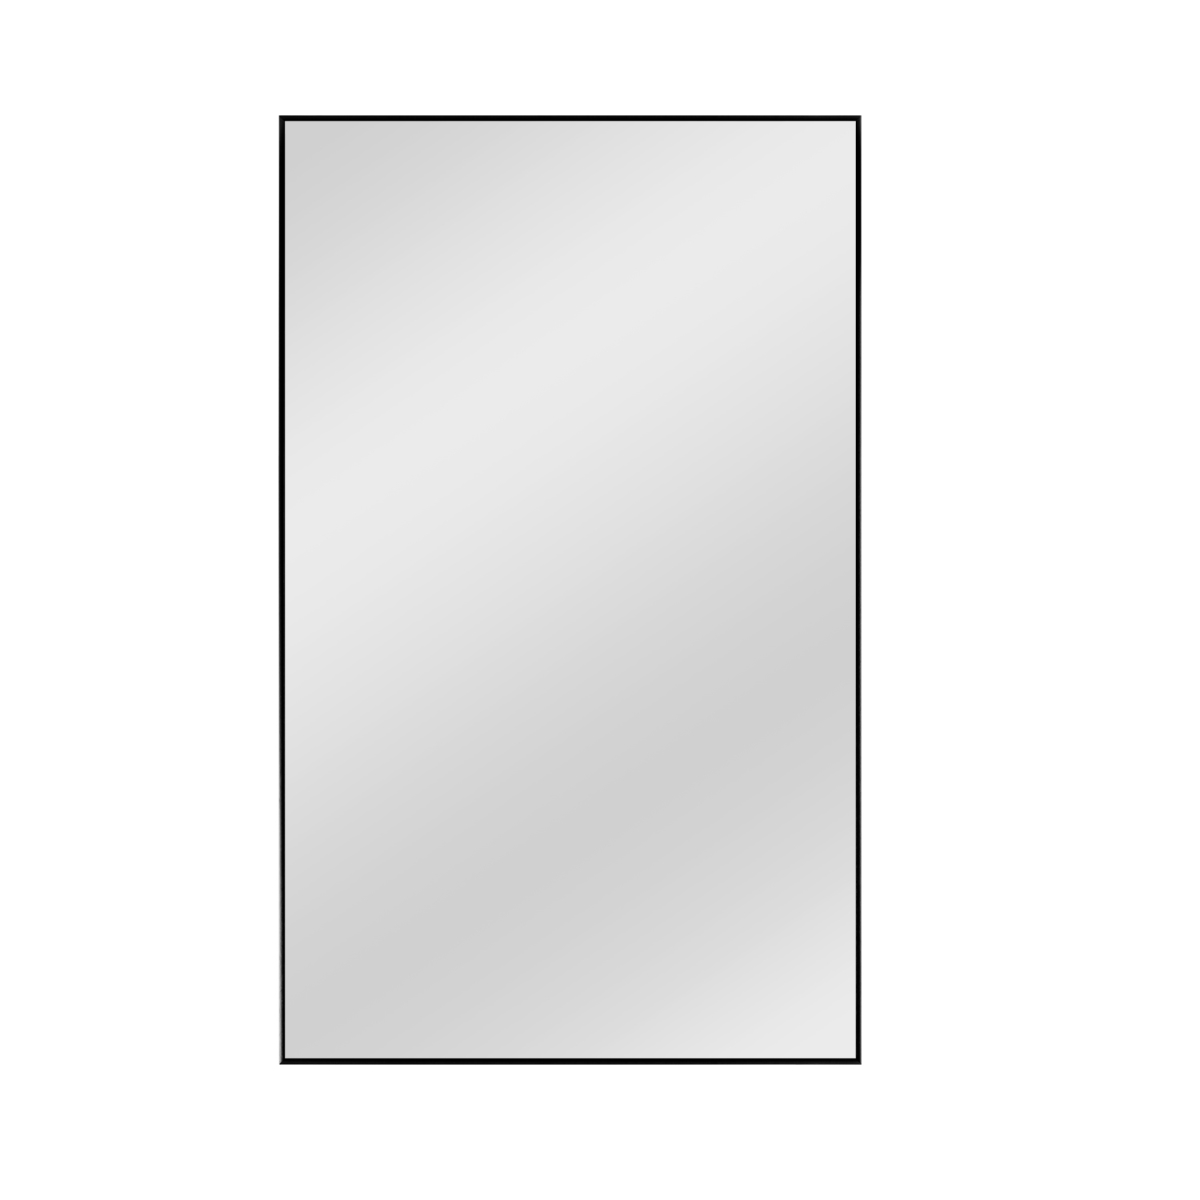 UPC 808230000032 product image for 397382 51.2 x 31.5 x 0.9 in. Minimal Black & Clear Wall Mirror | upcitemdb.com